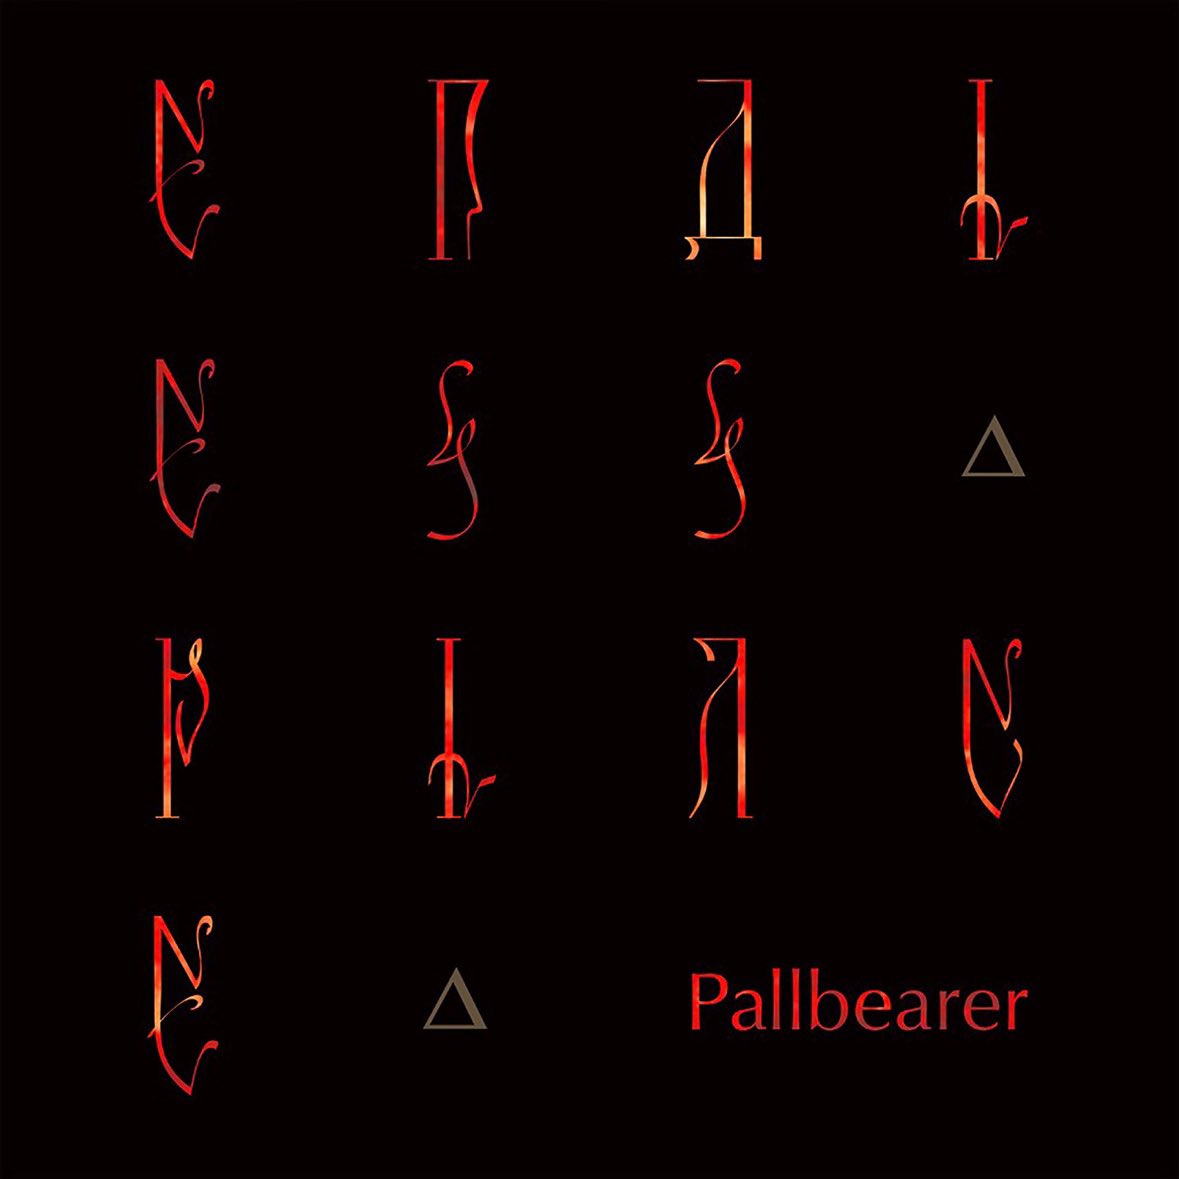 #Nowplaying Endless Place - Pallbearer (Endless Place - EP)